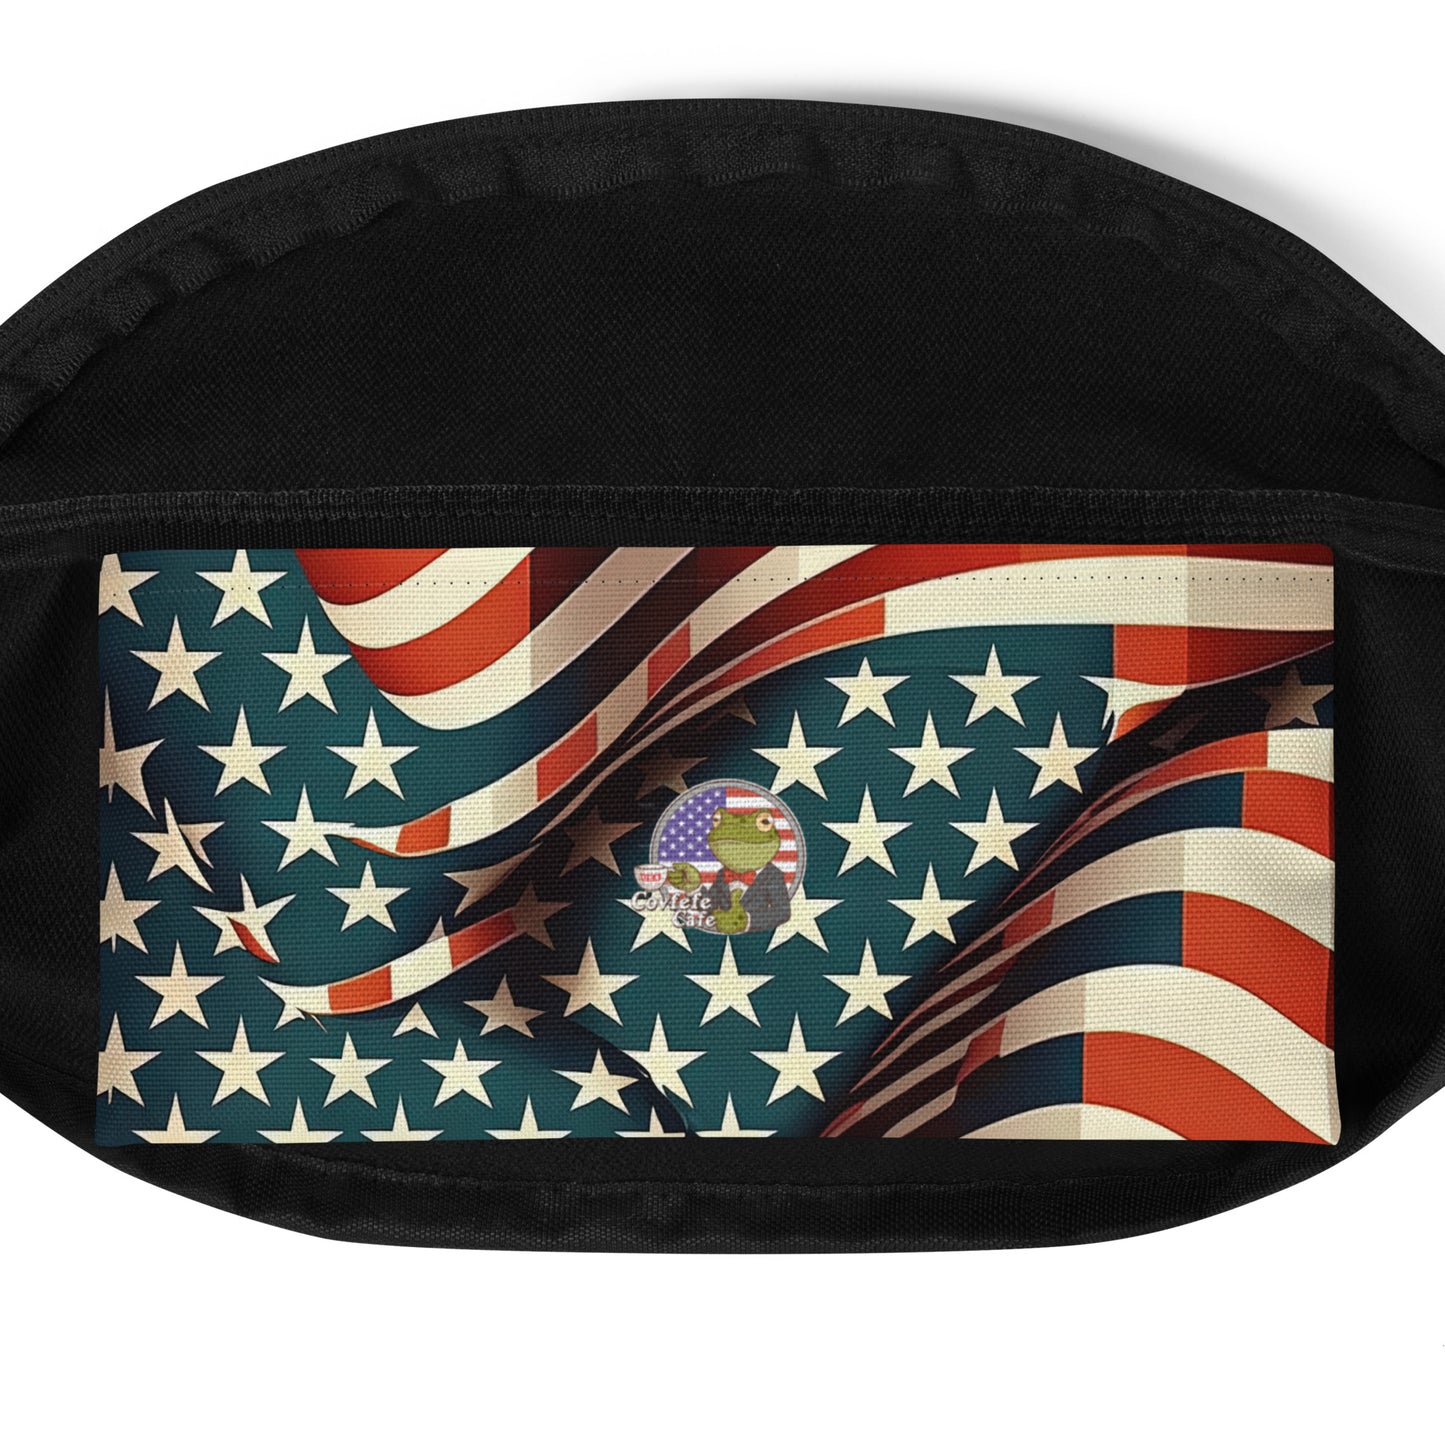 USA Fanny Pack